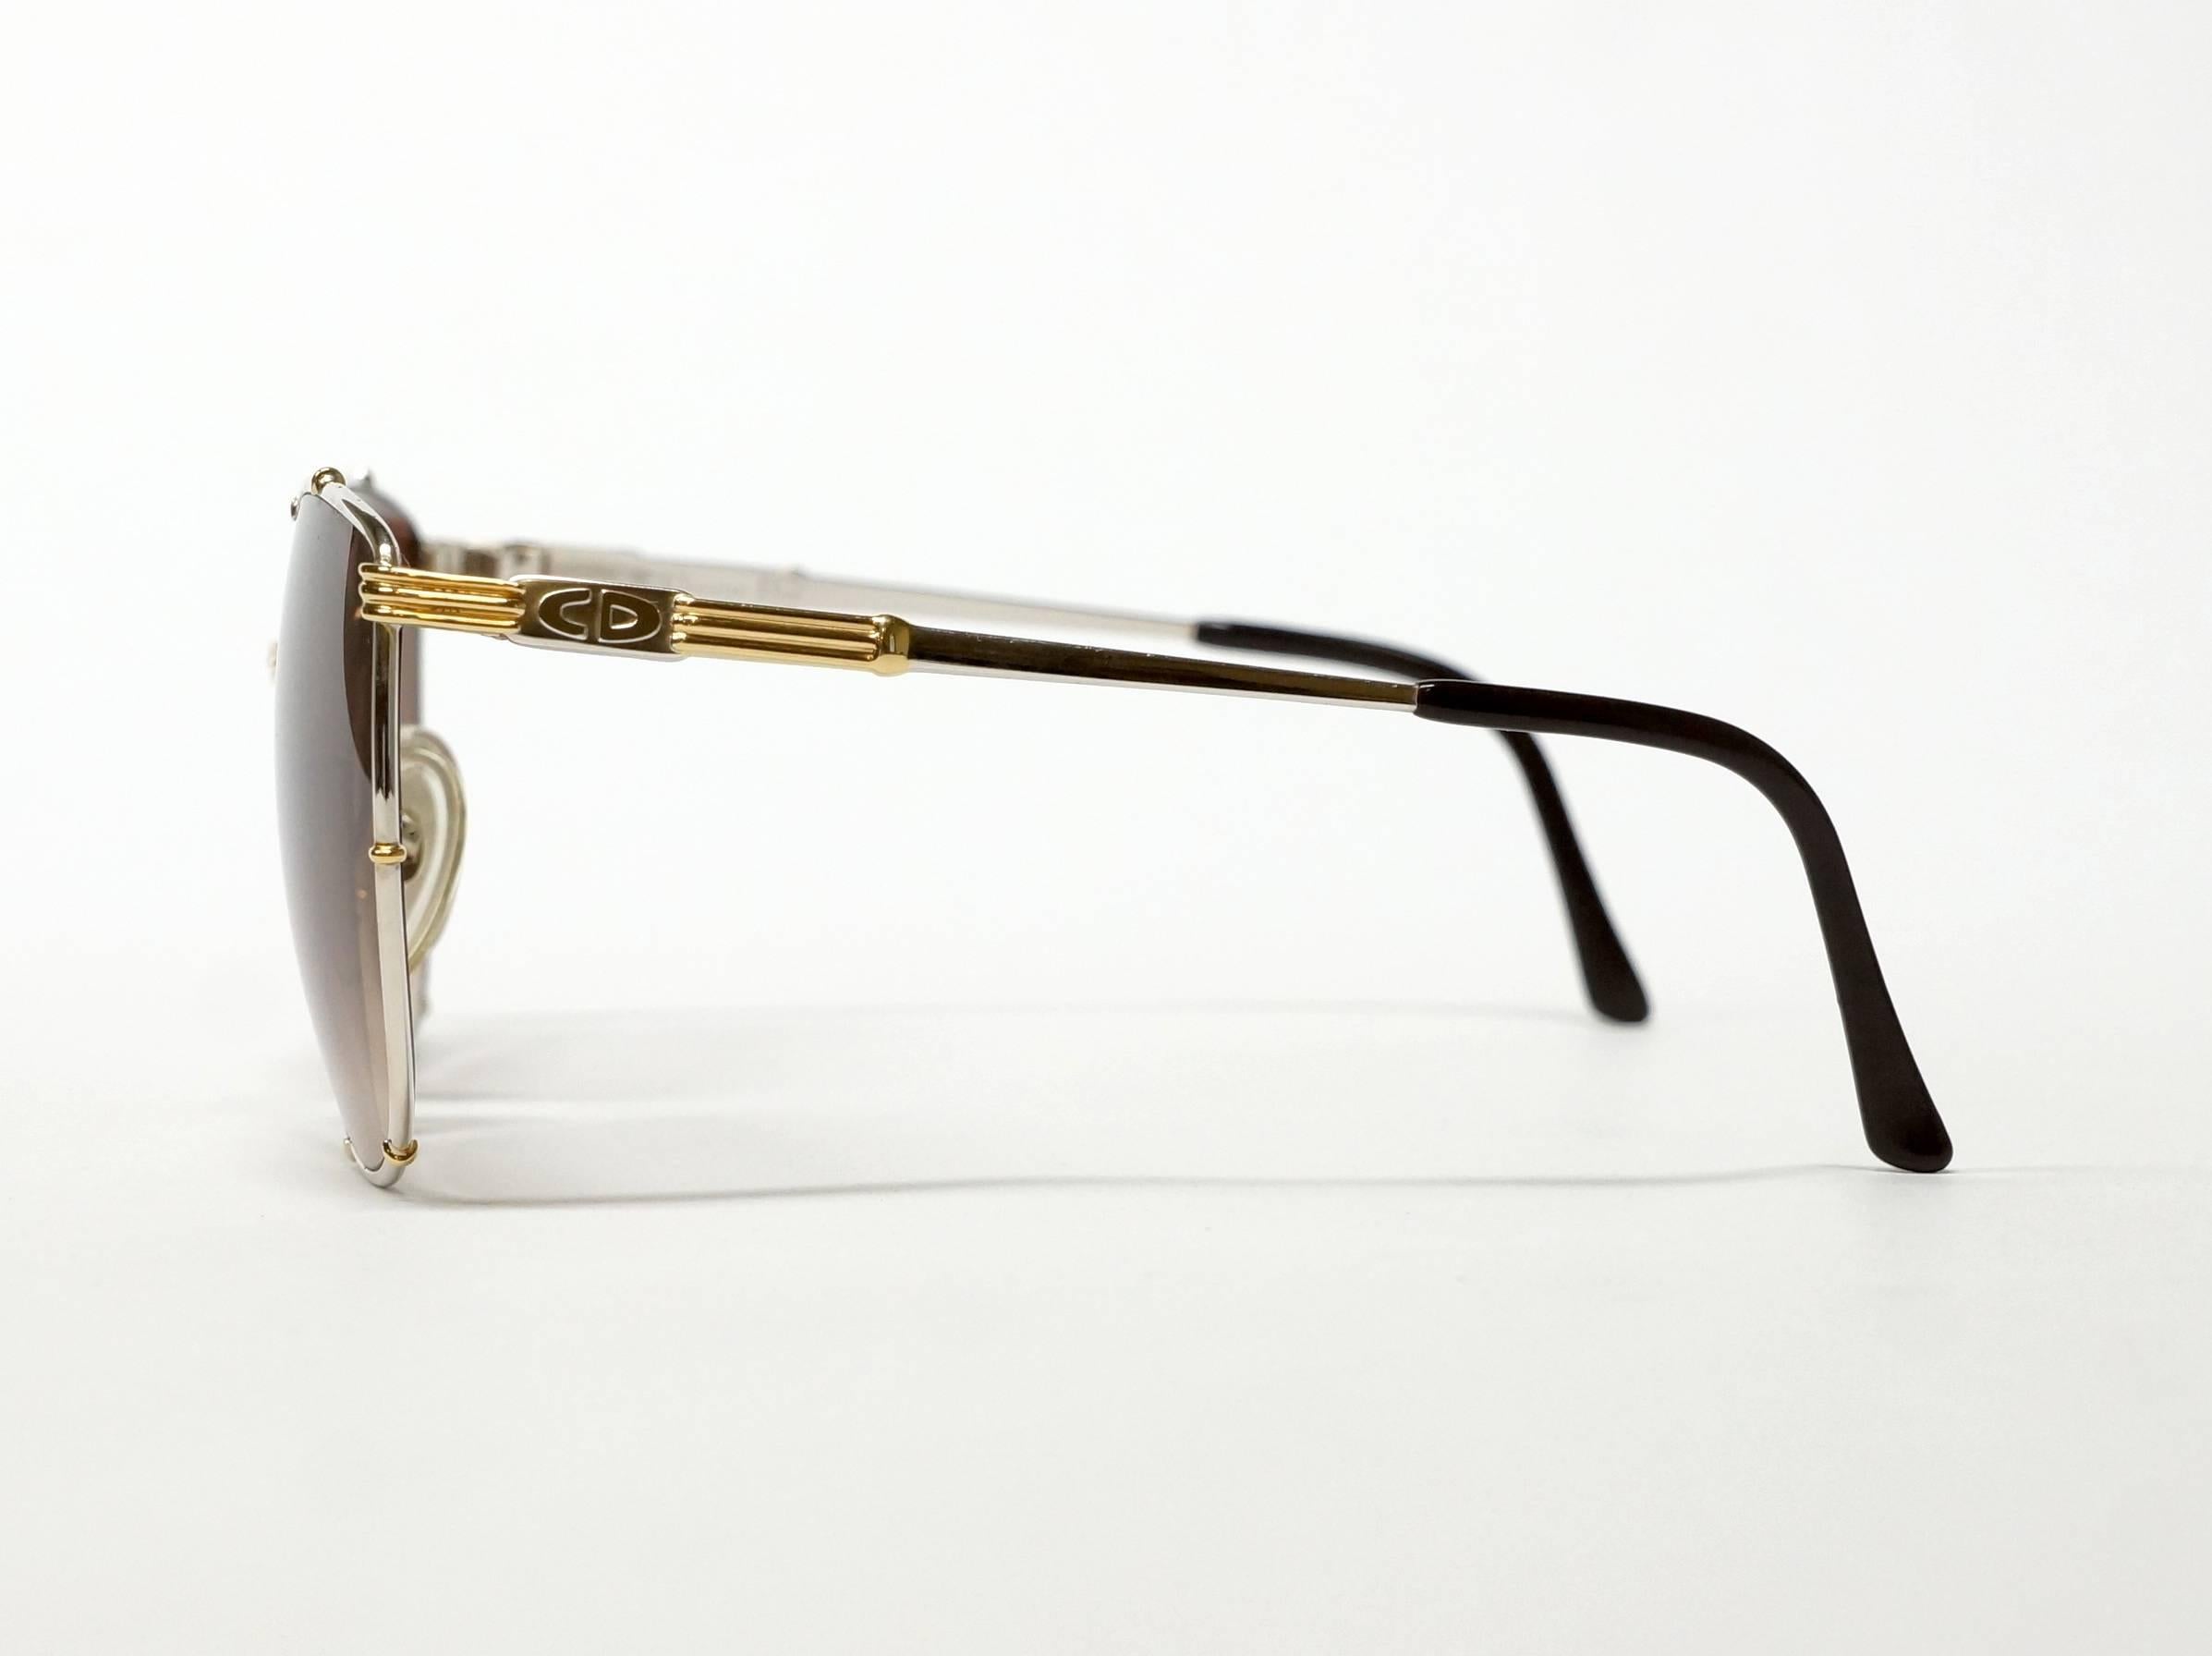 Women's Vintage Christian Dior Bicolor Metal Sunglasses in New Old Stock Condition For Sale